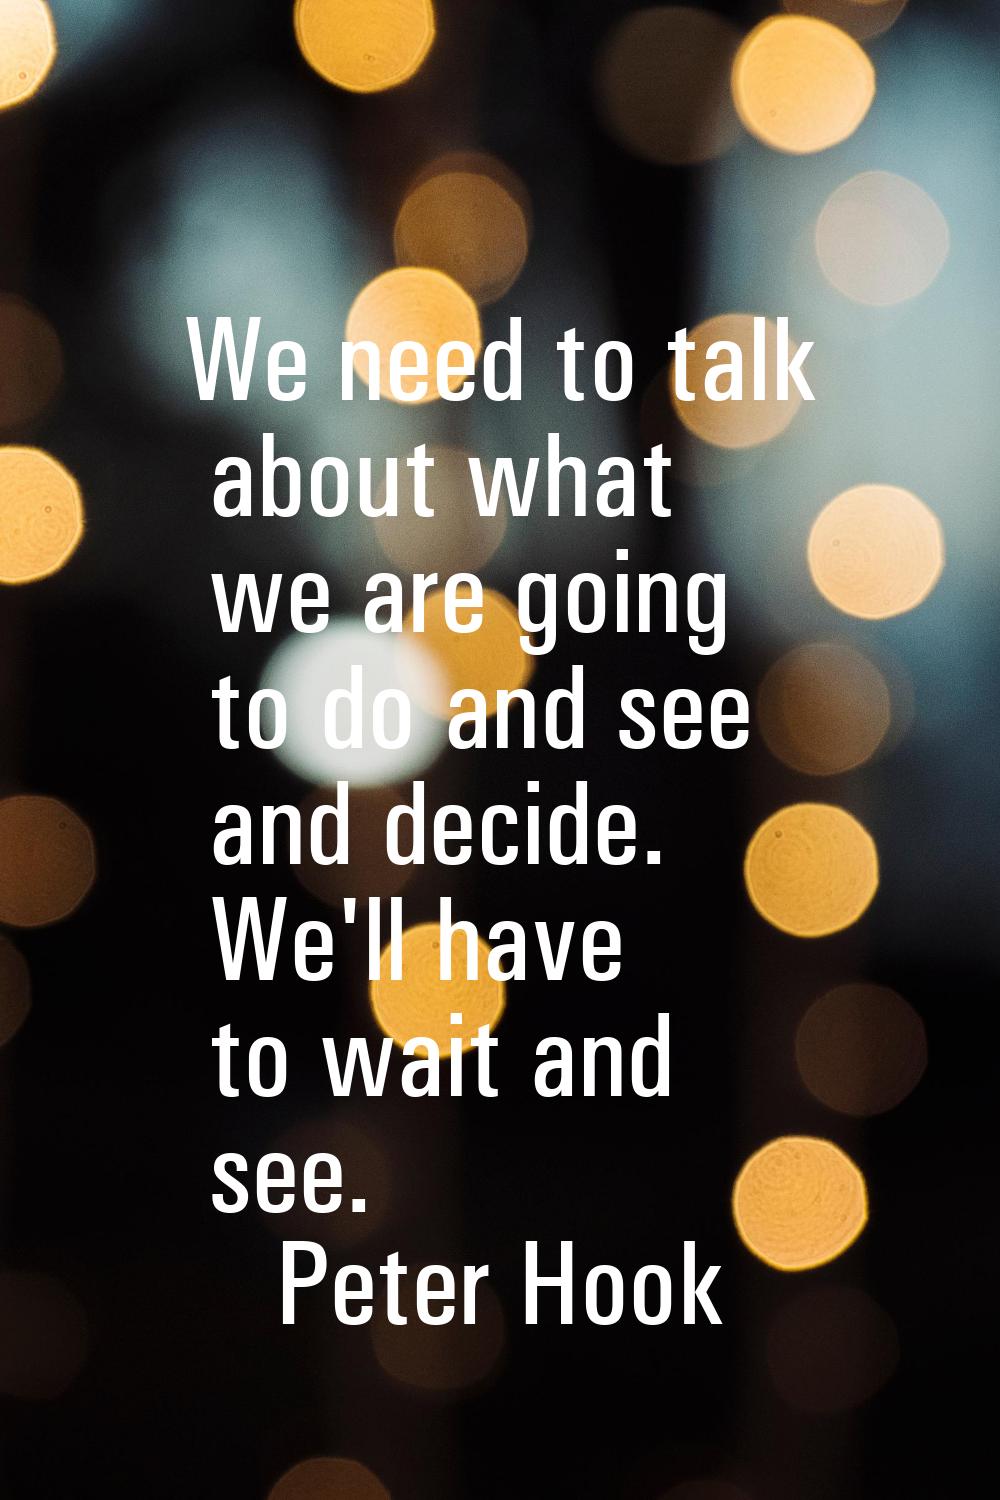 We need to talk about what we are going to do and see and decide. We'll have to wait and see.